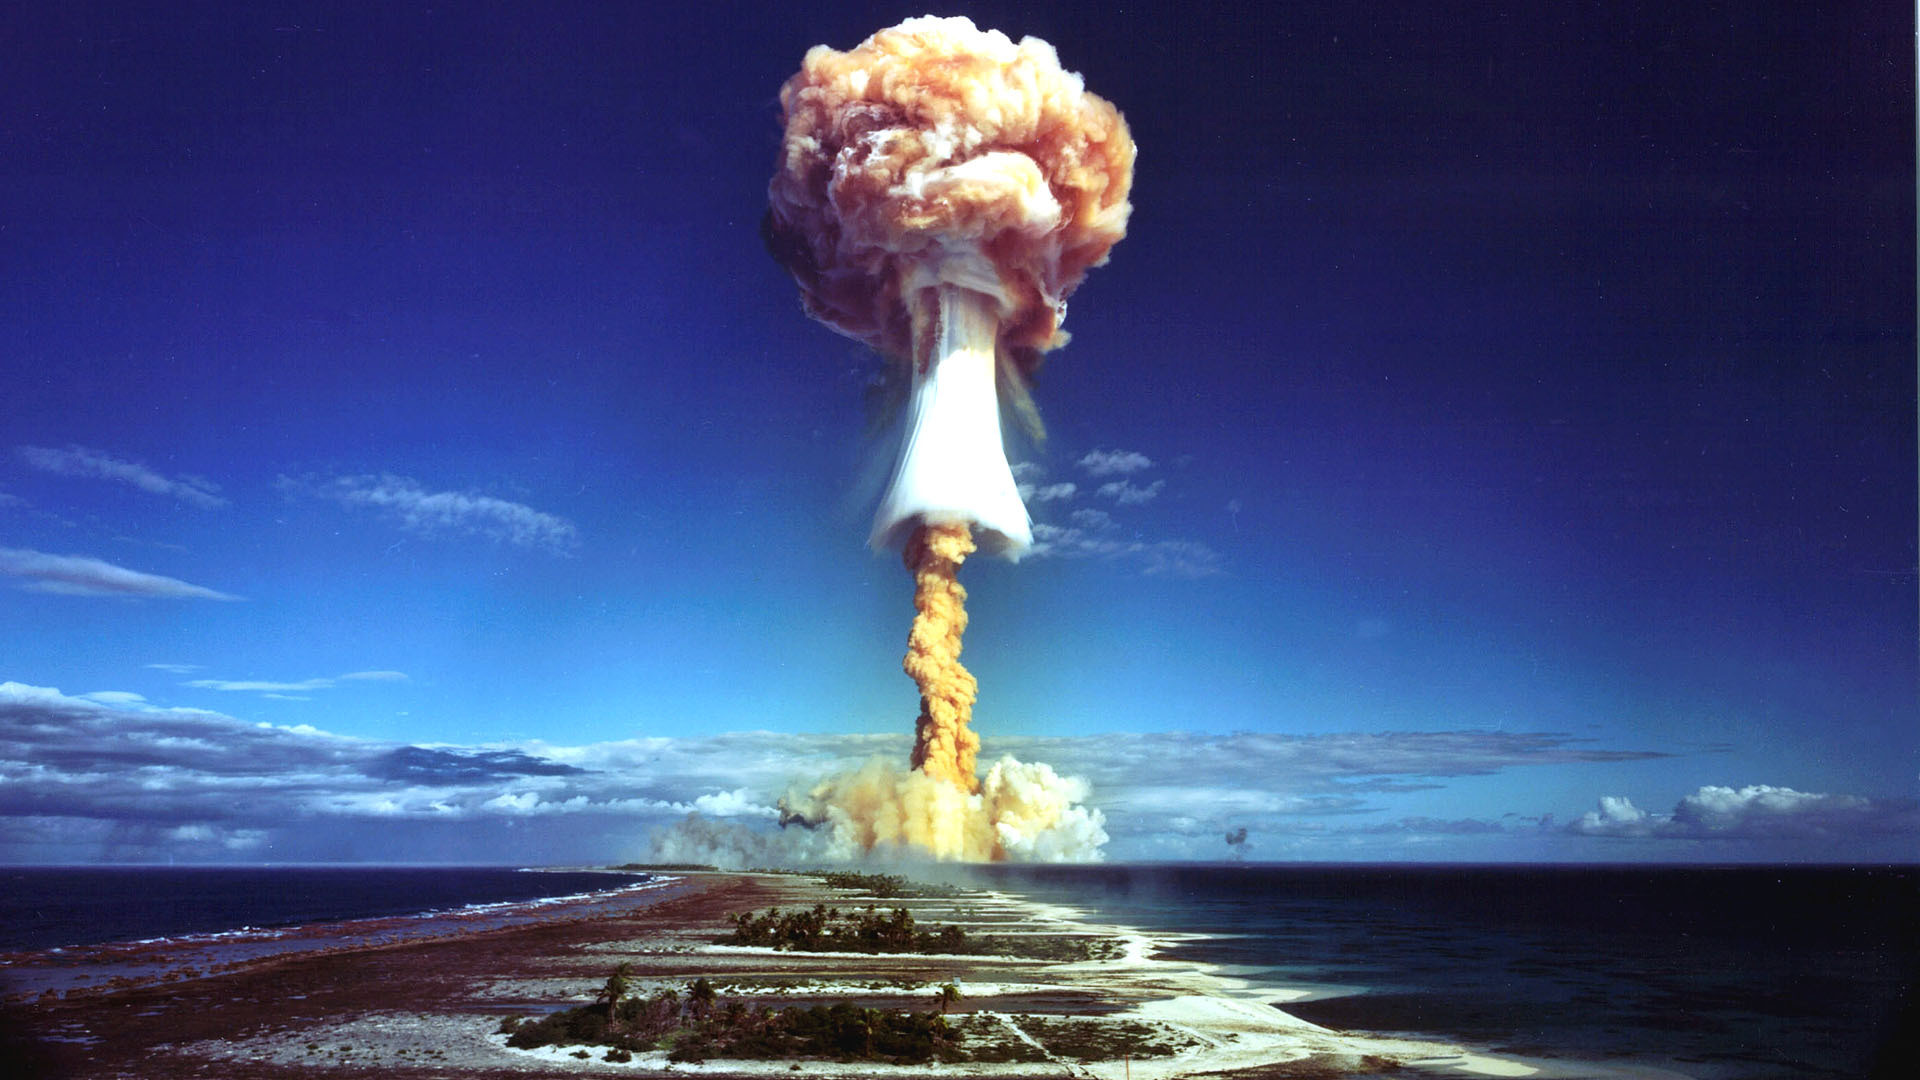 1920x1080 Sea Bomb Atomic Landscape Ocean Nuclear Islands Sky Clouds Explosion  Radiation Wallpaper At Dark Wallpapers